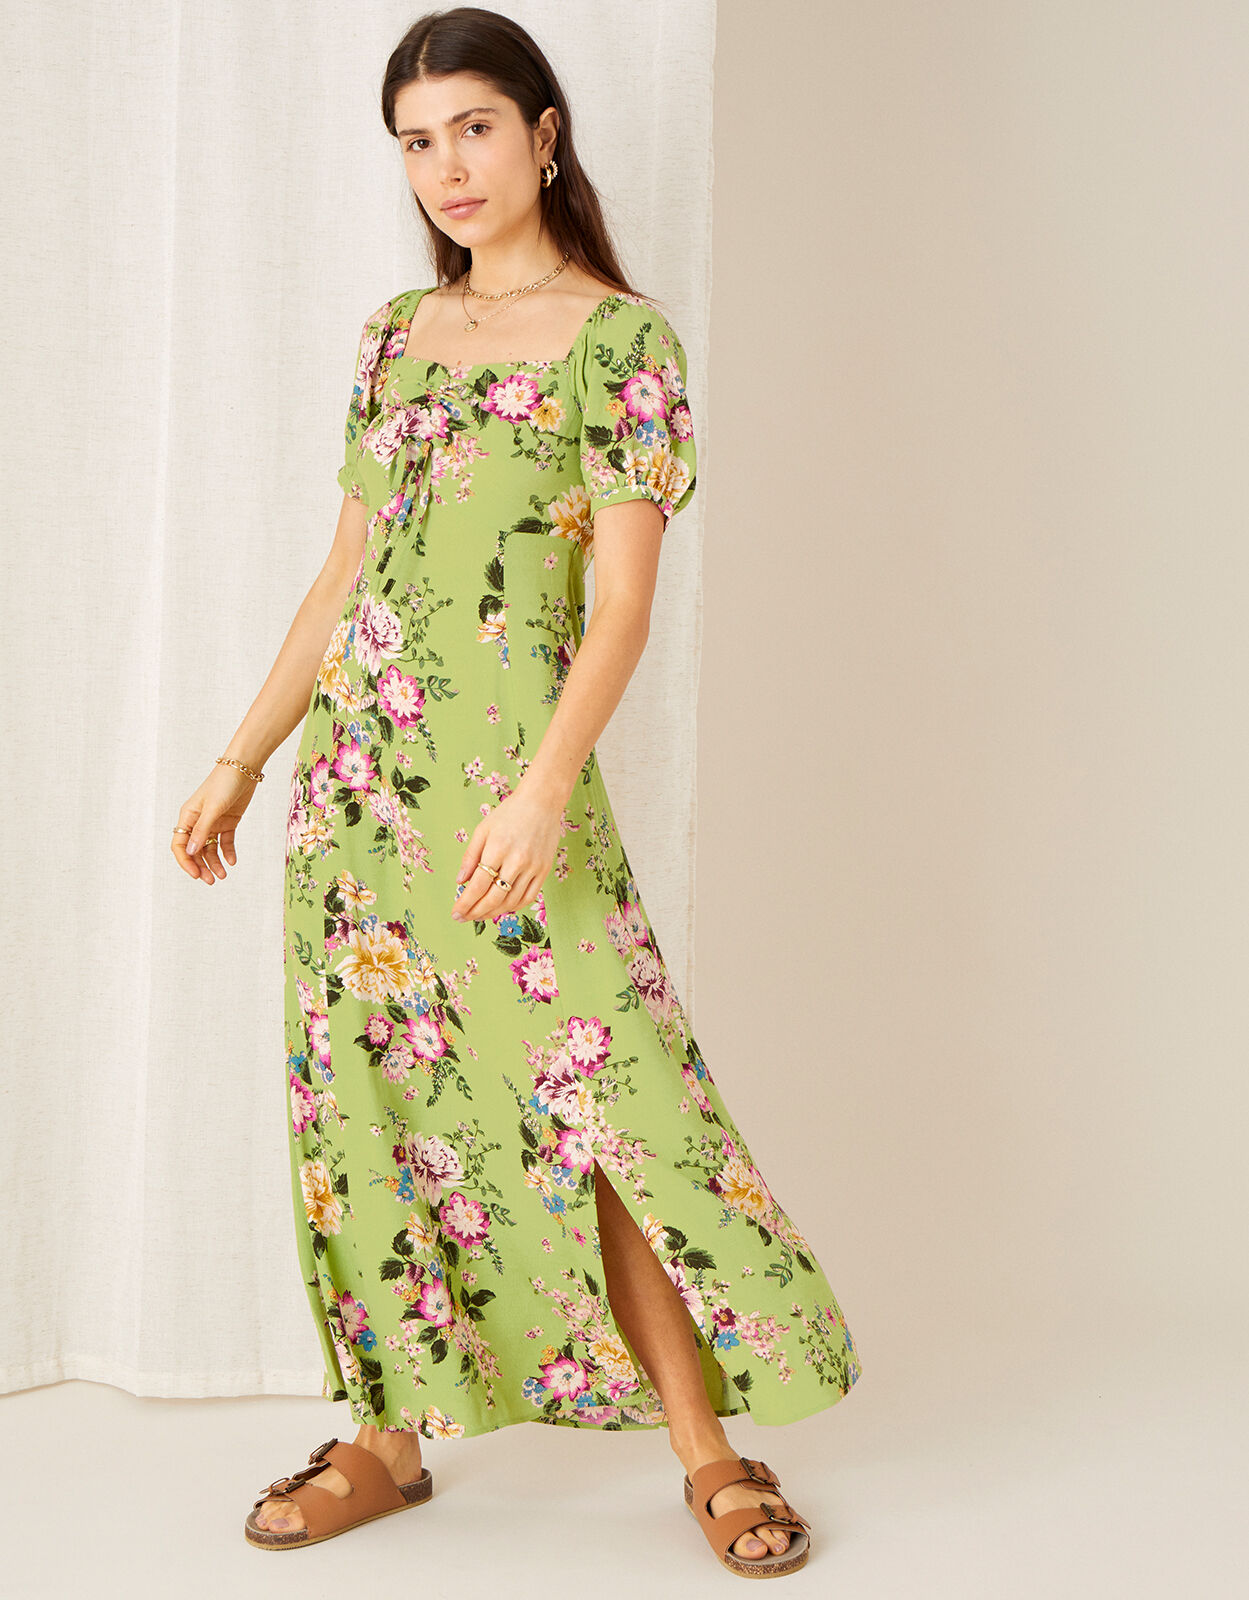 Floral Sweetheart Dress with ...